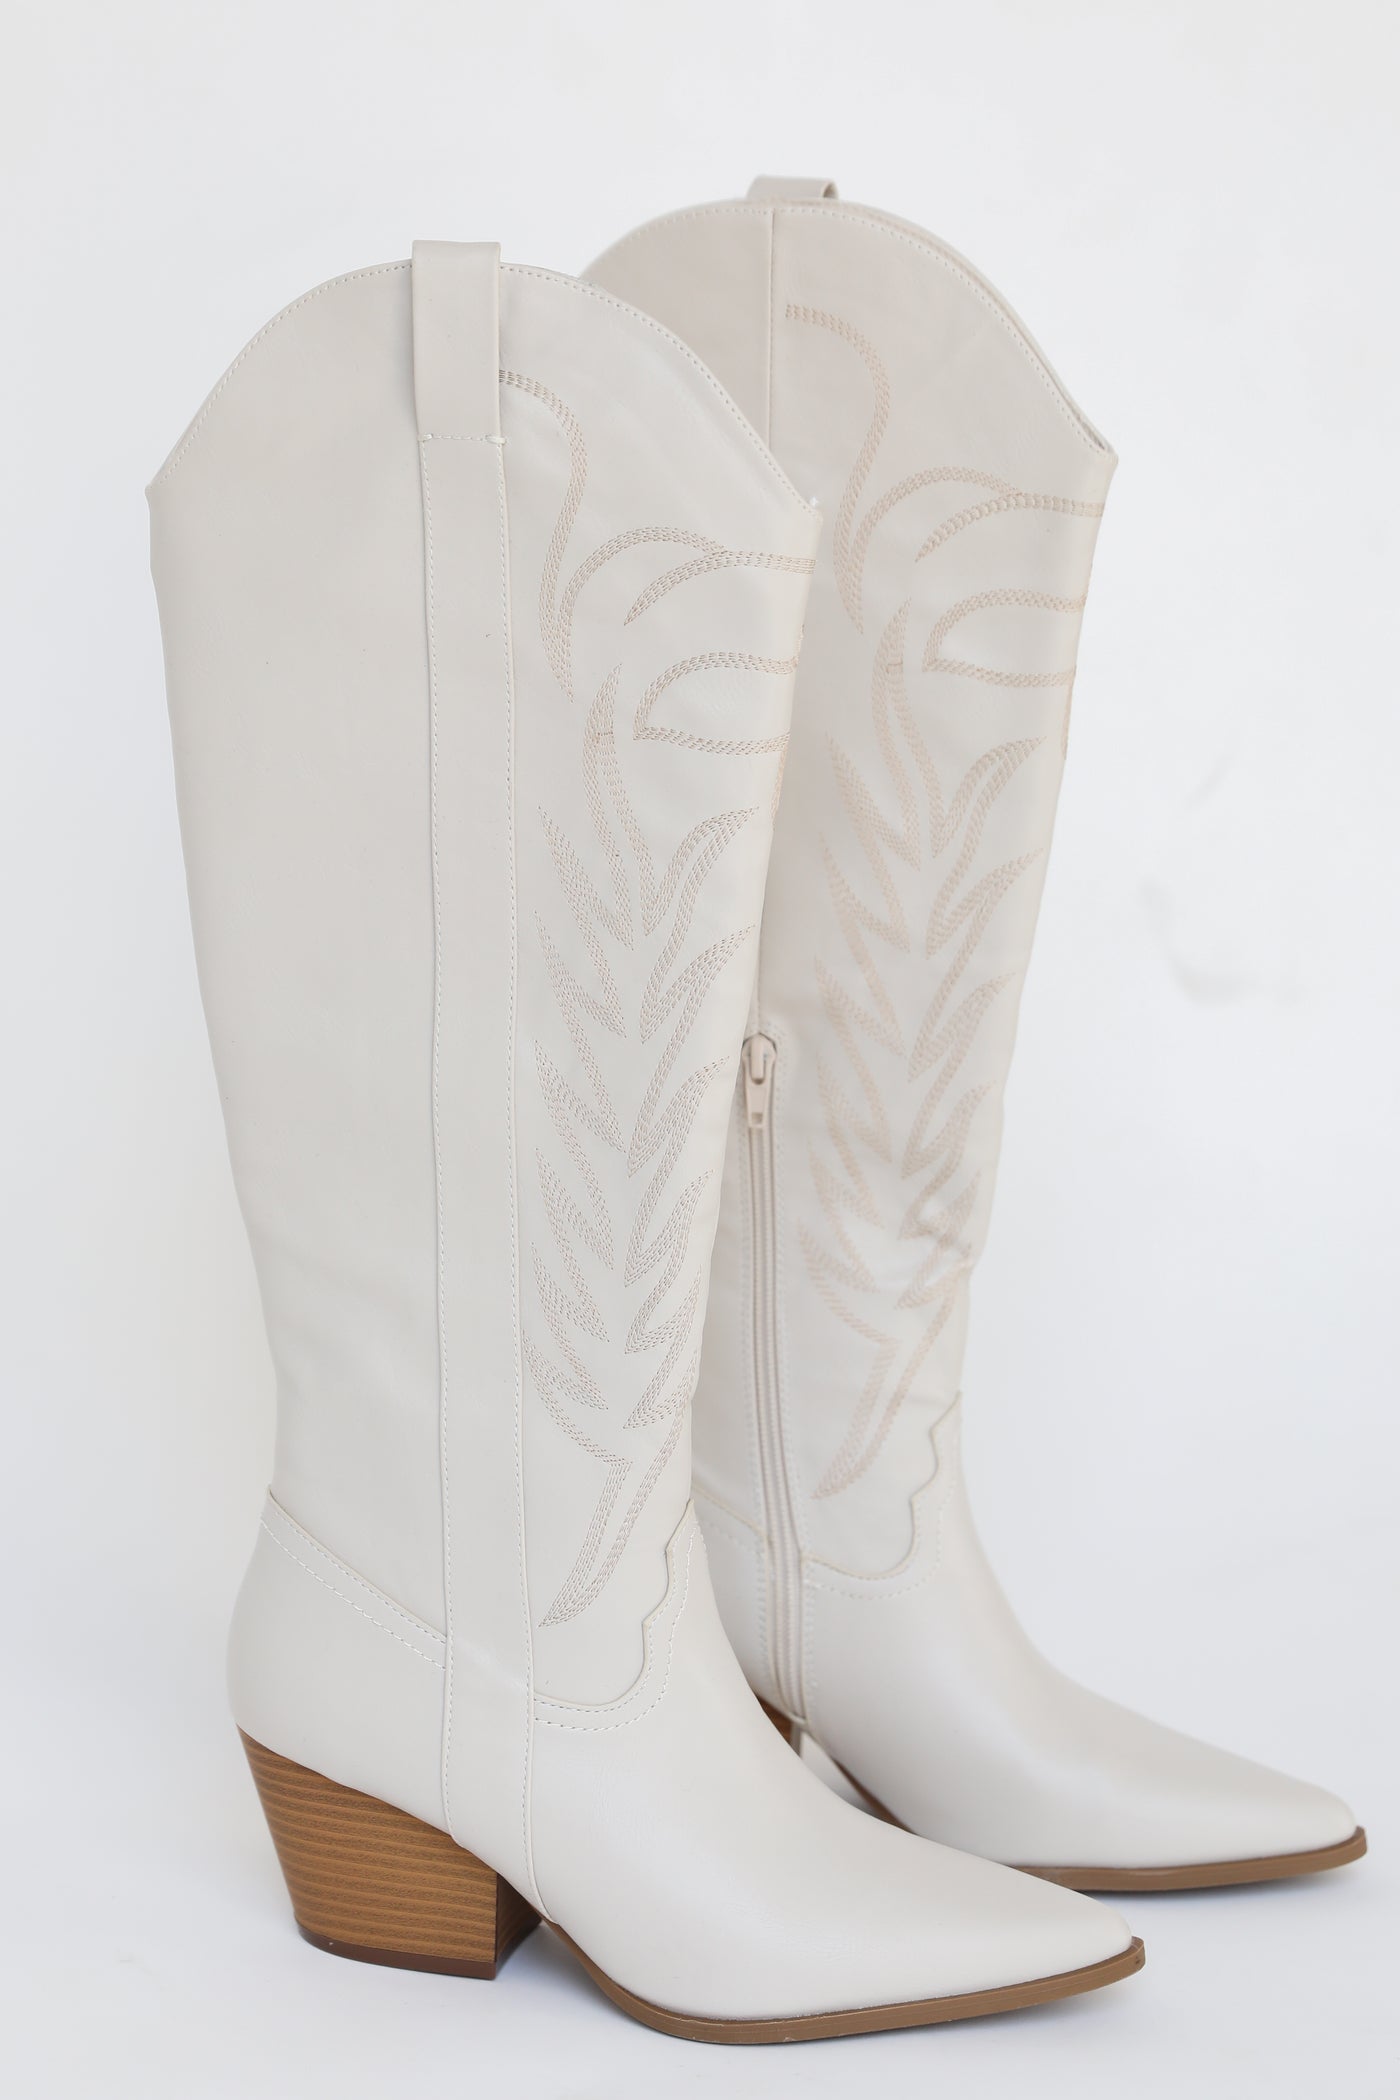 white Western Knee High Boots side view